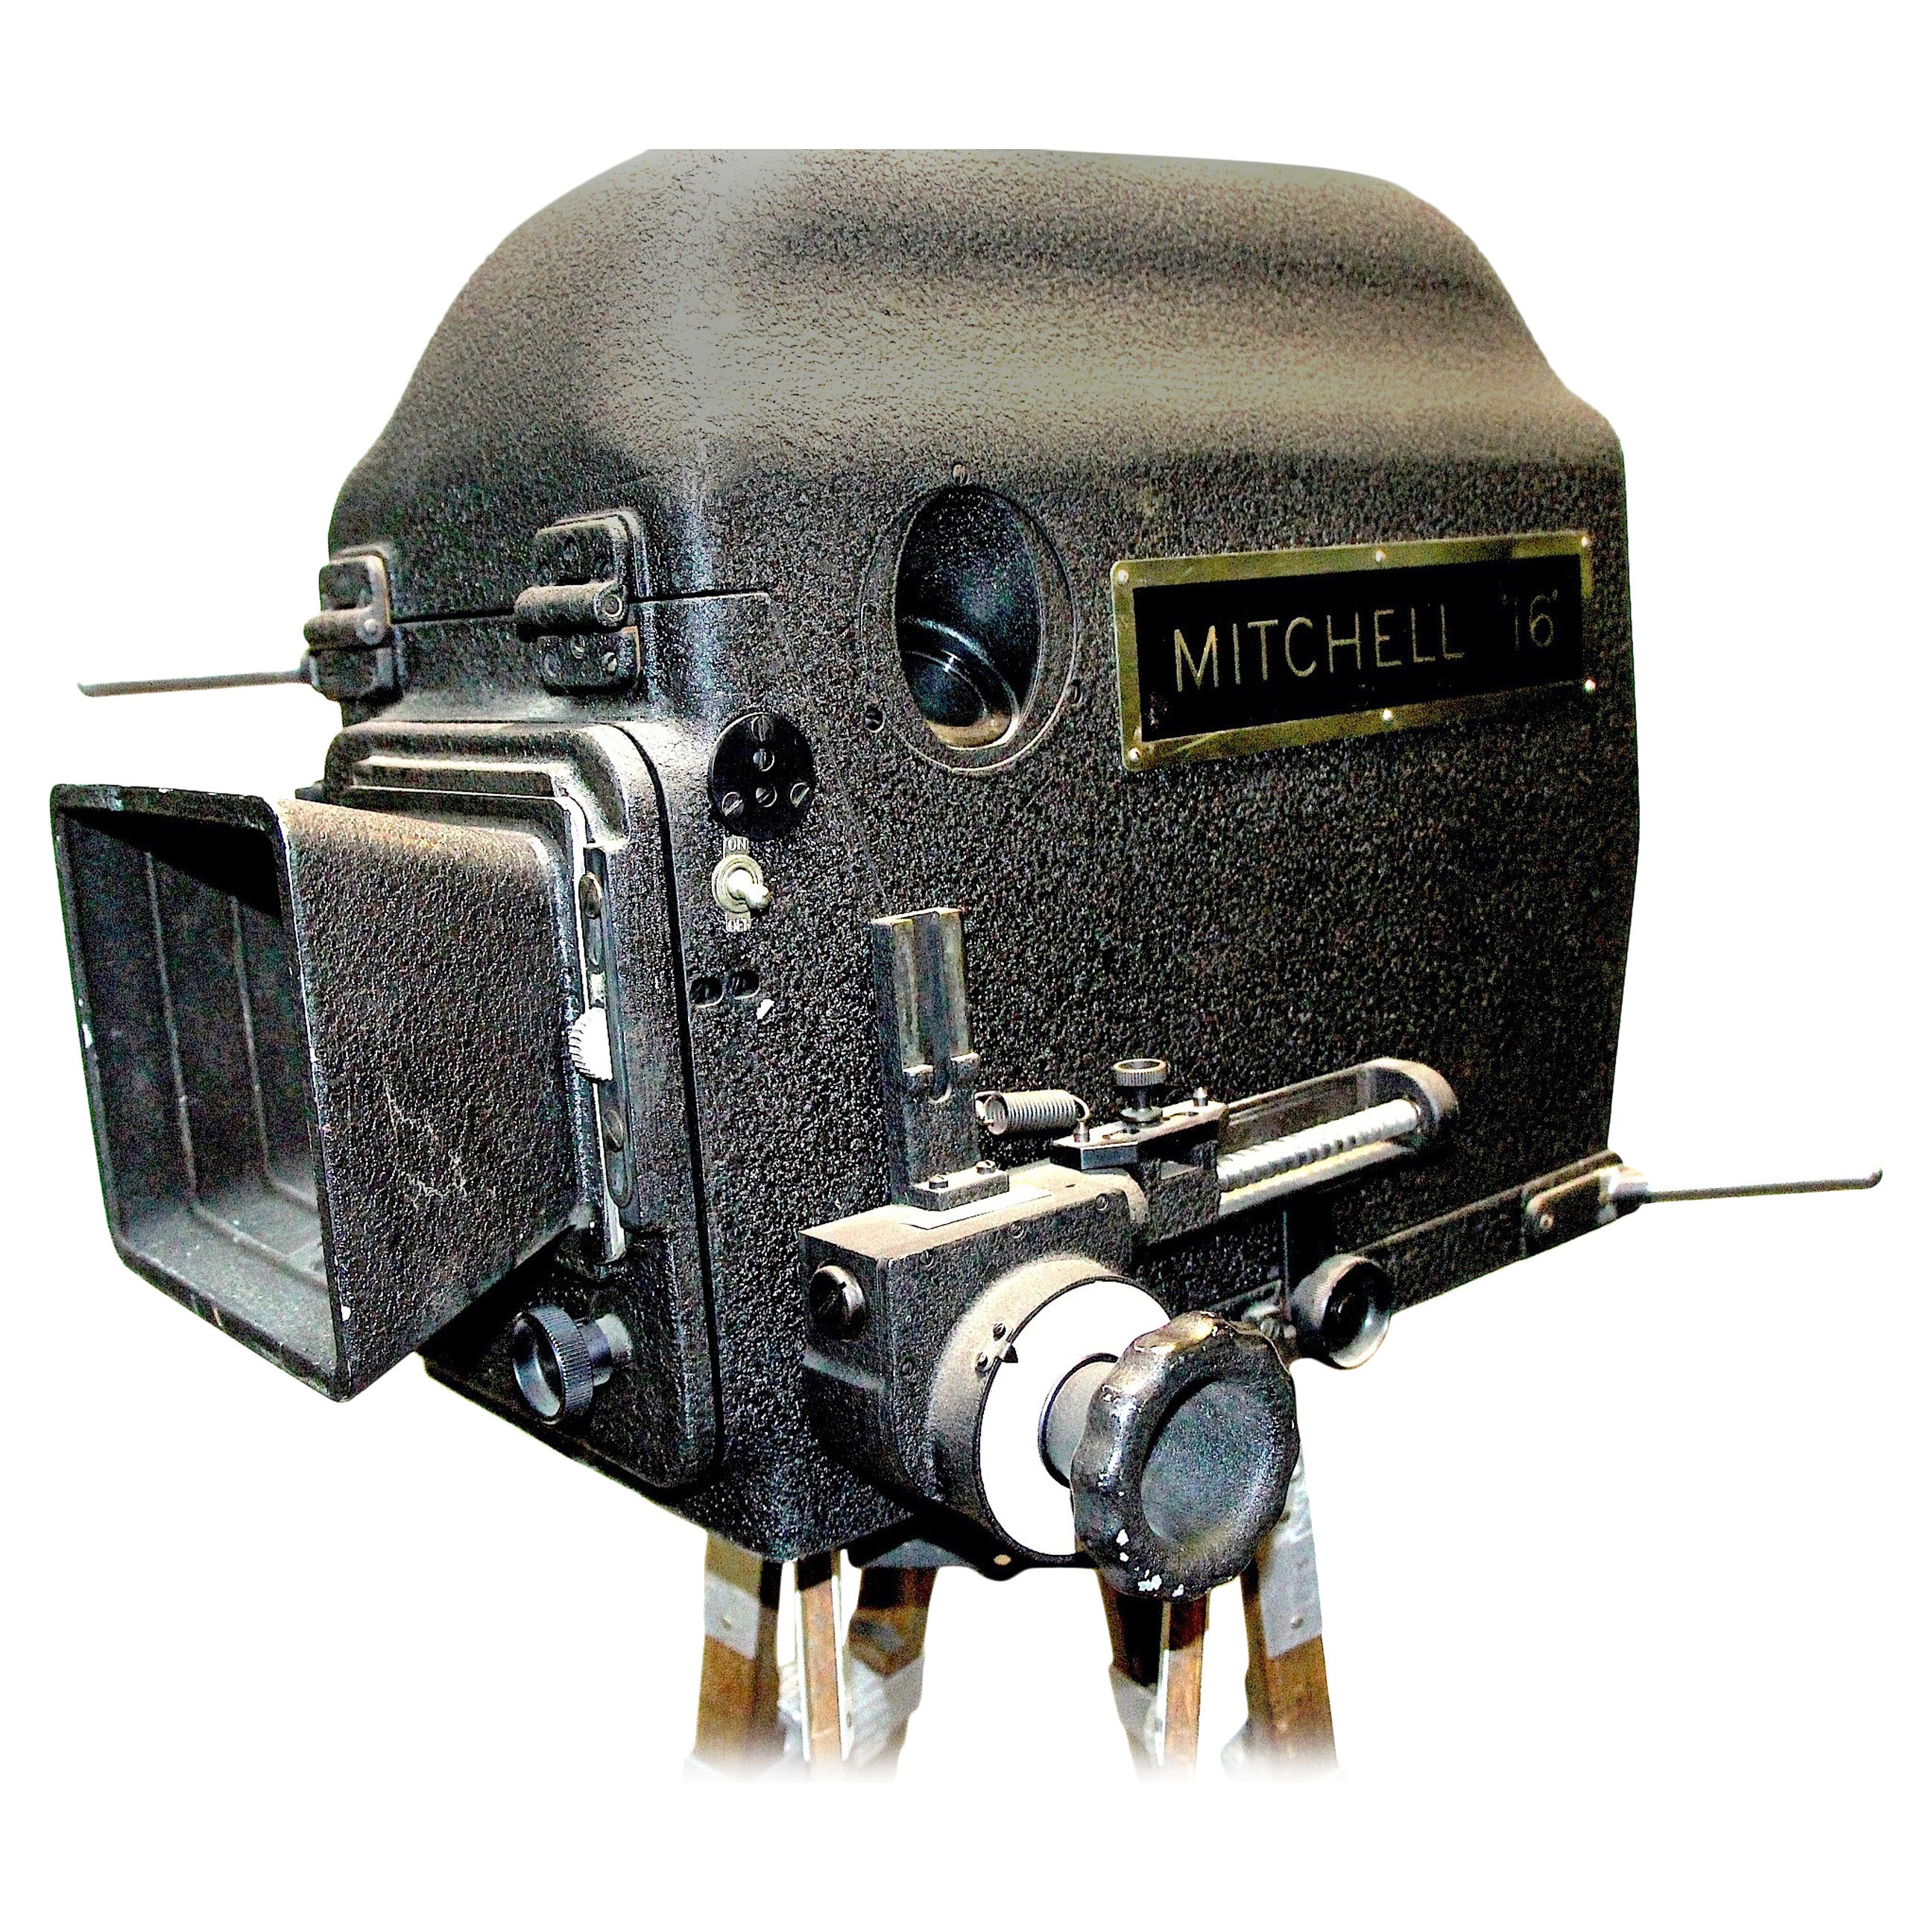 Mitchell Camera 16mm Camera Blimp Housing, Circa 1940, As Sculpture. ON SALE NOW For Sale